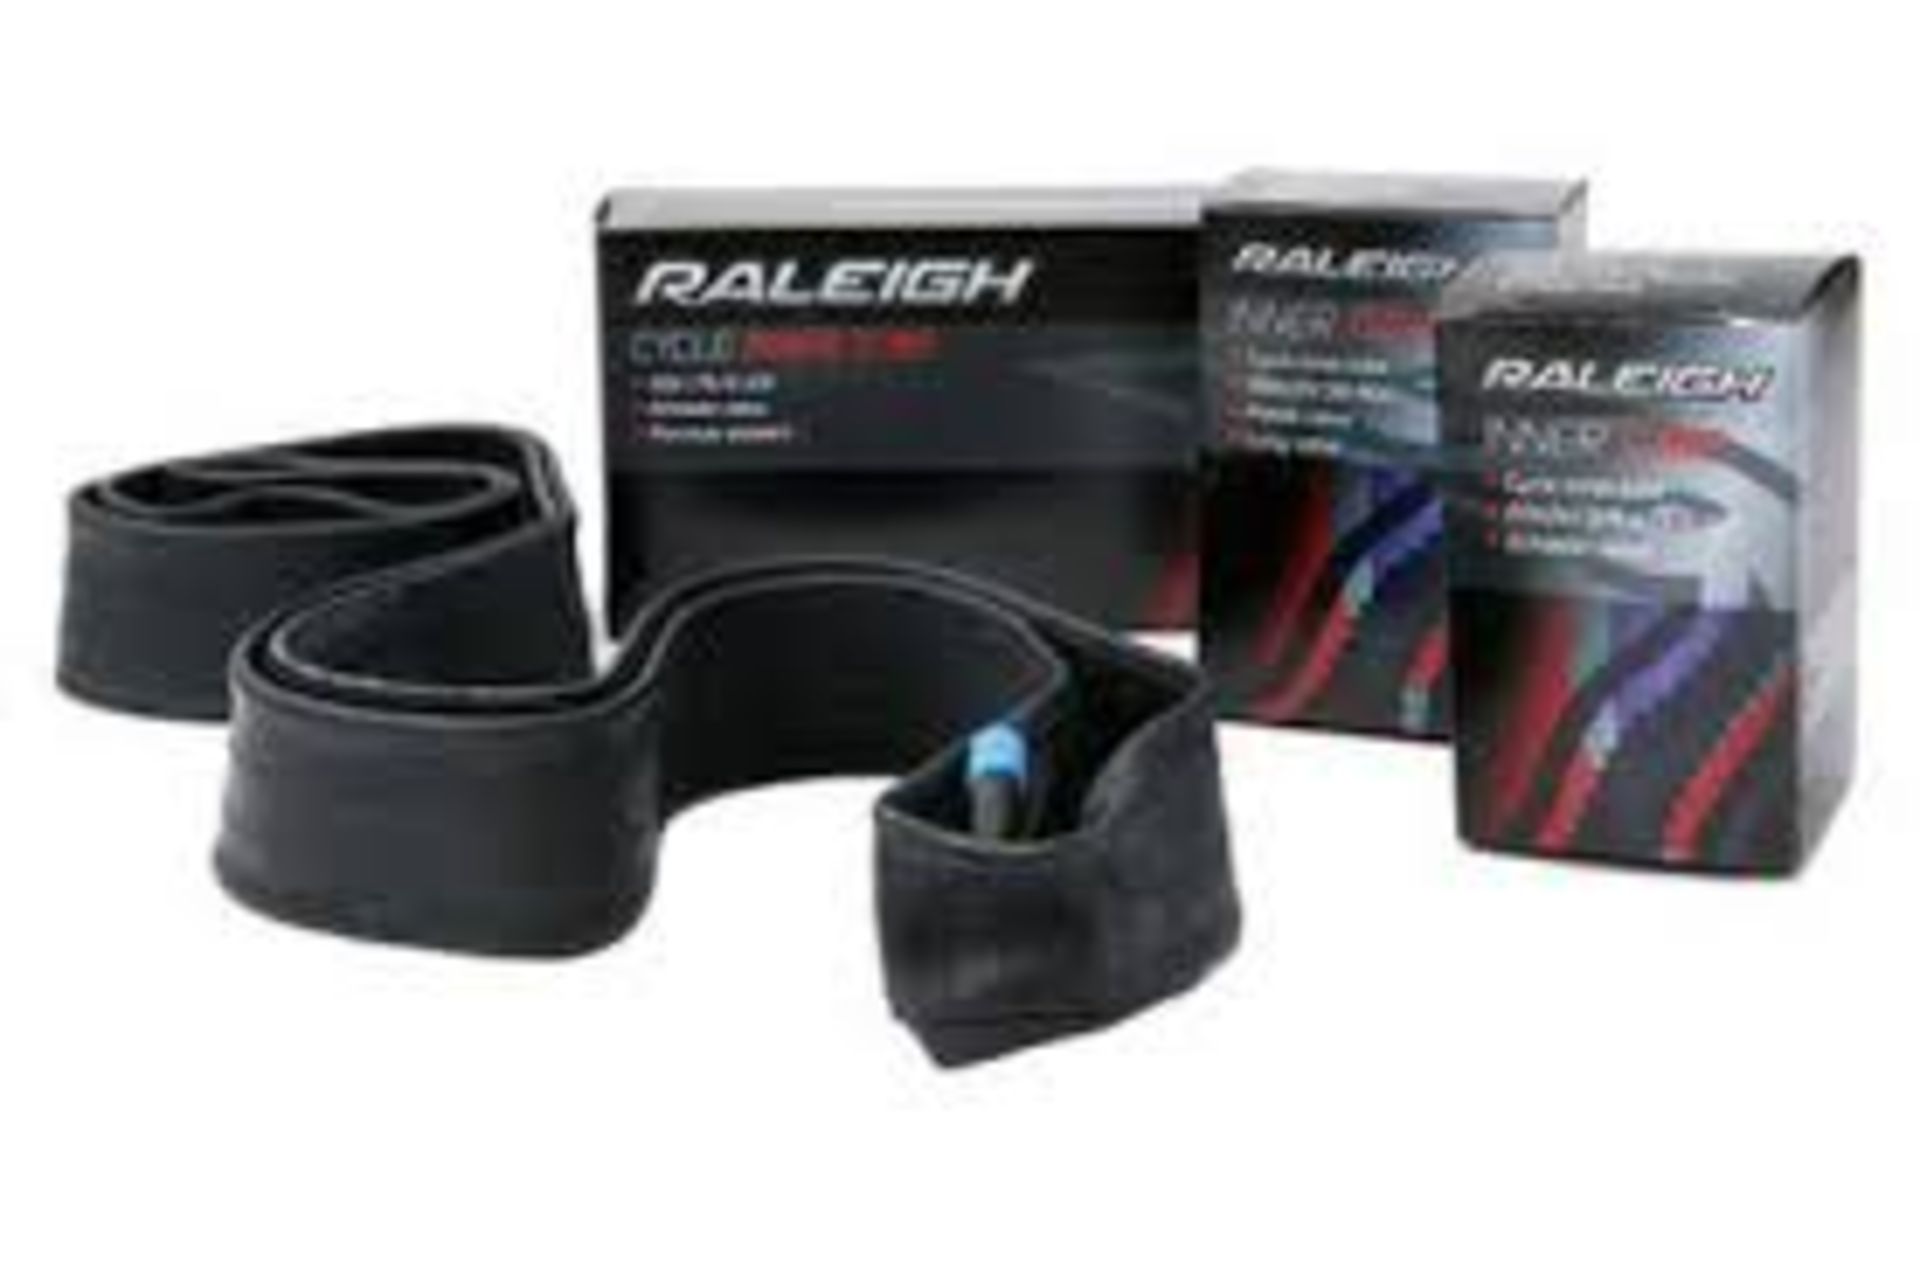 V Brand New Two Raleigh Inner tubes 26 x 1.50-2.125 for adult mountain bike X 2 YOUR BID PRICE TO BE